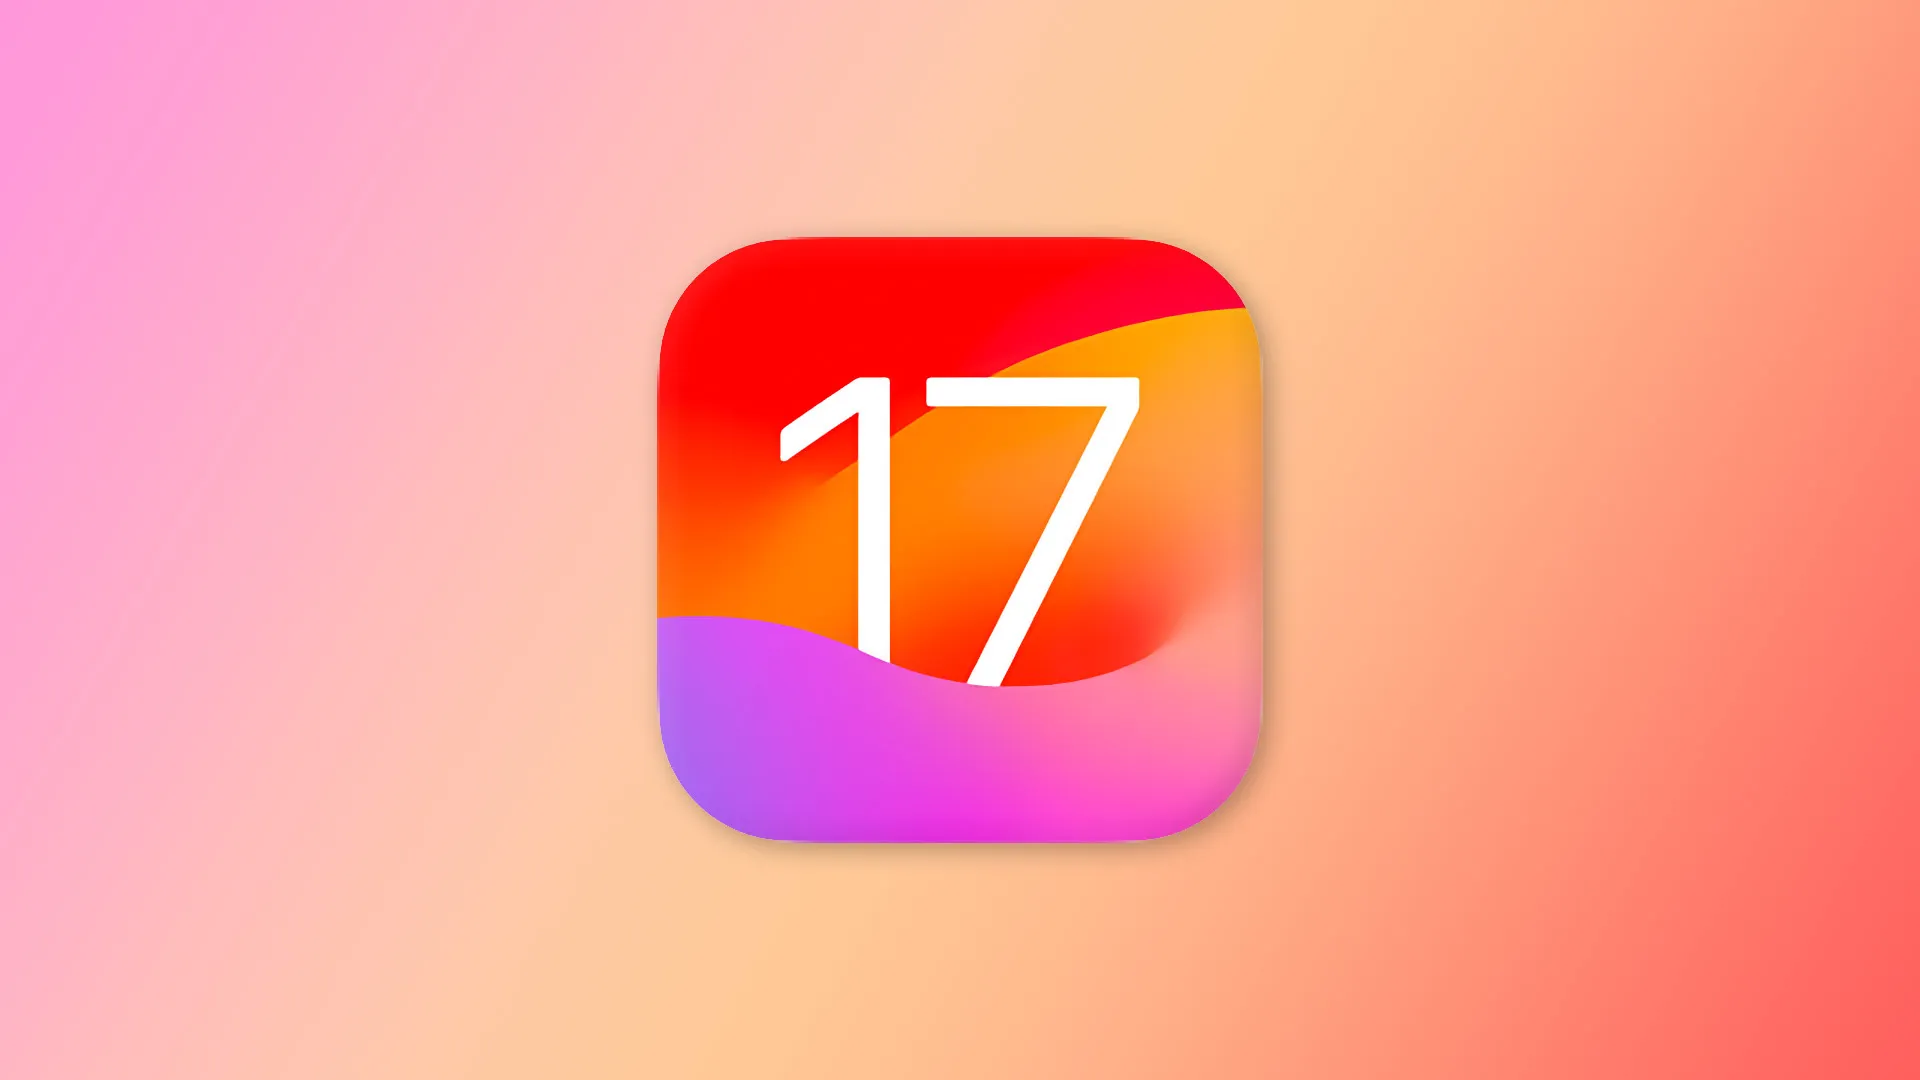 Apple to launch iOS 17 in September